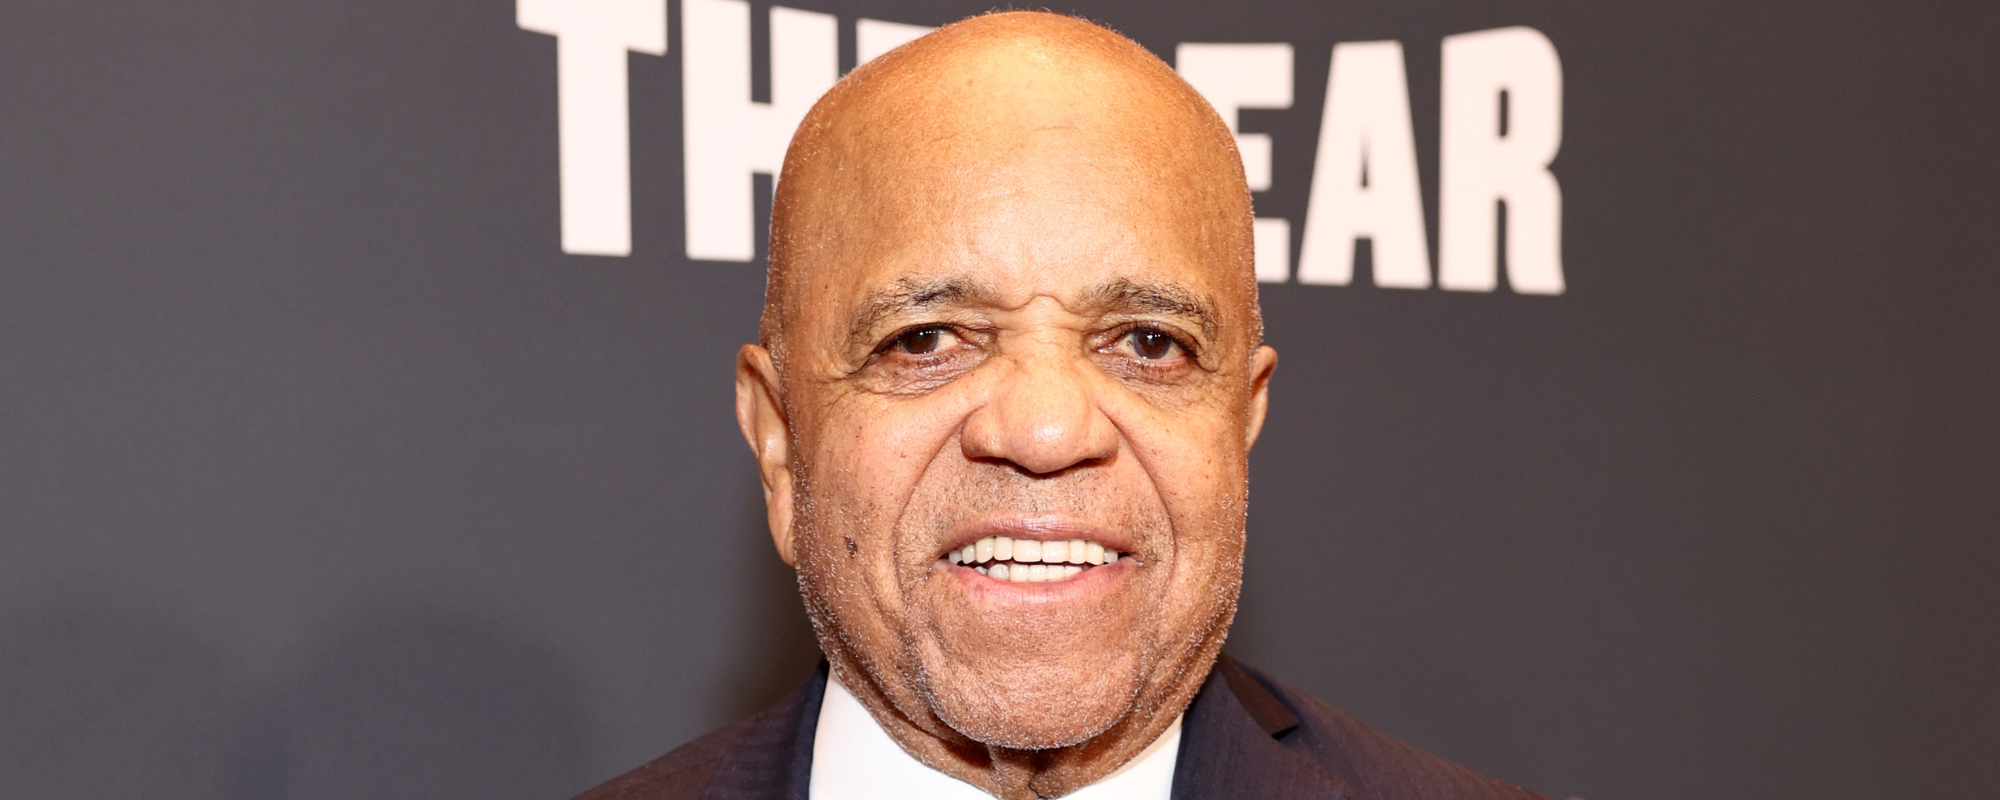 3 Songs You Didn’t Know Were Written by Berry Gordy